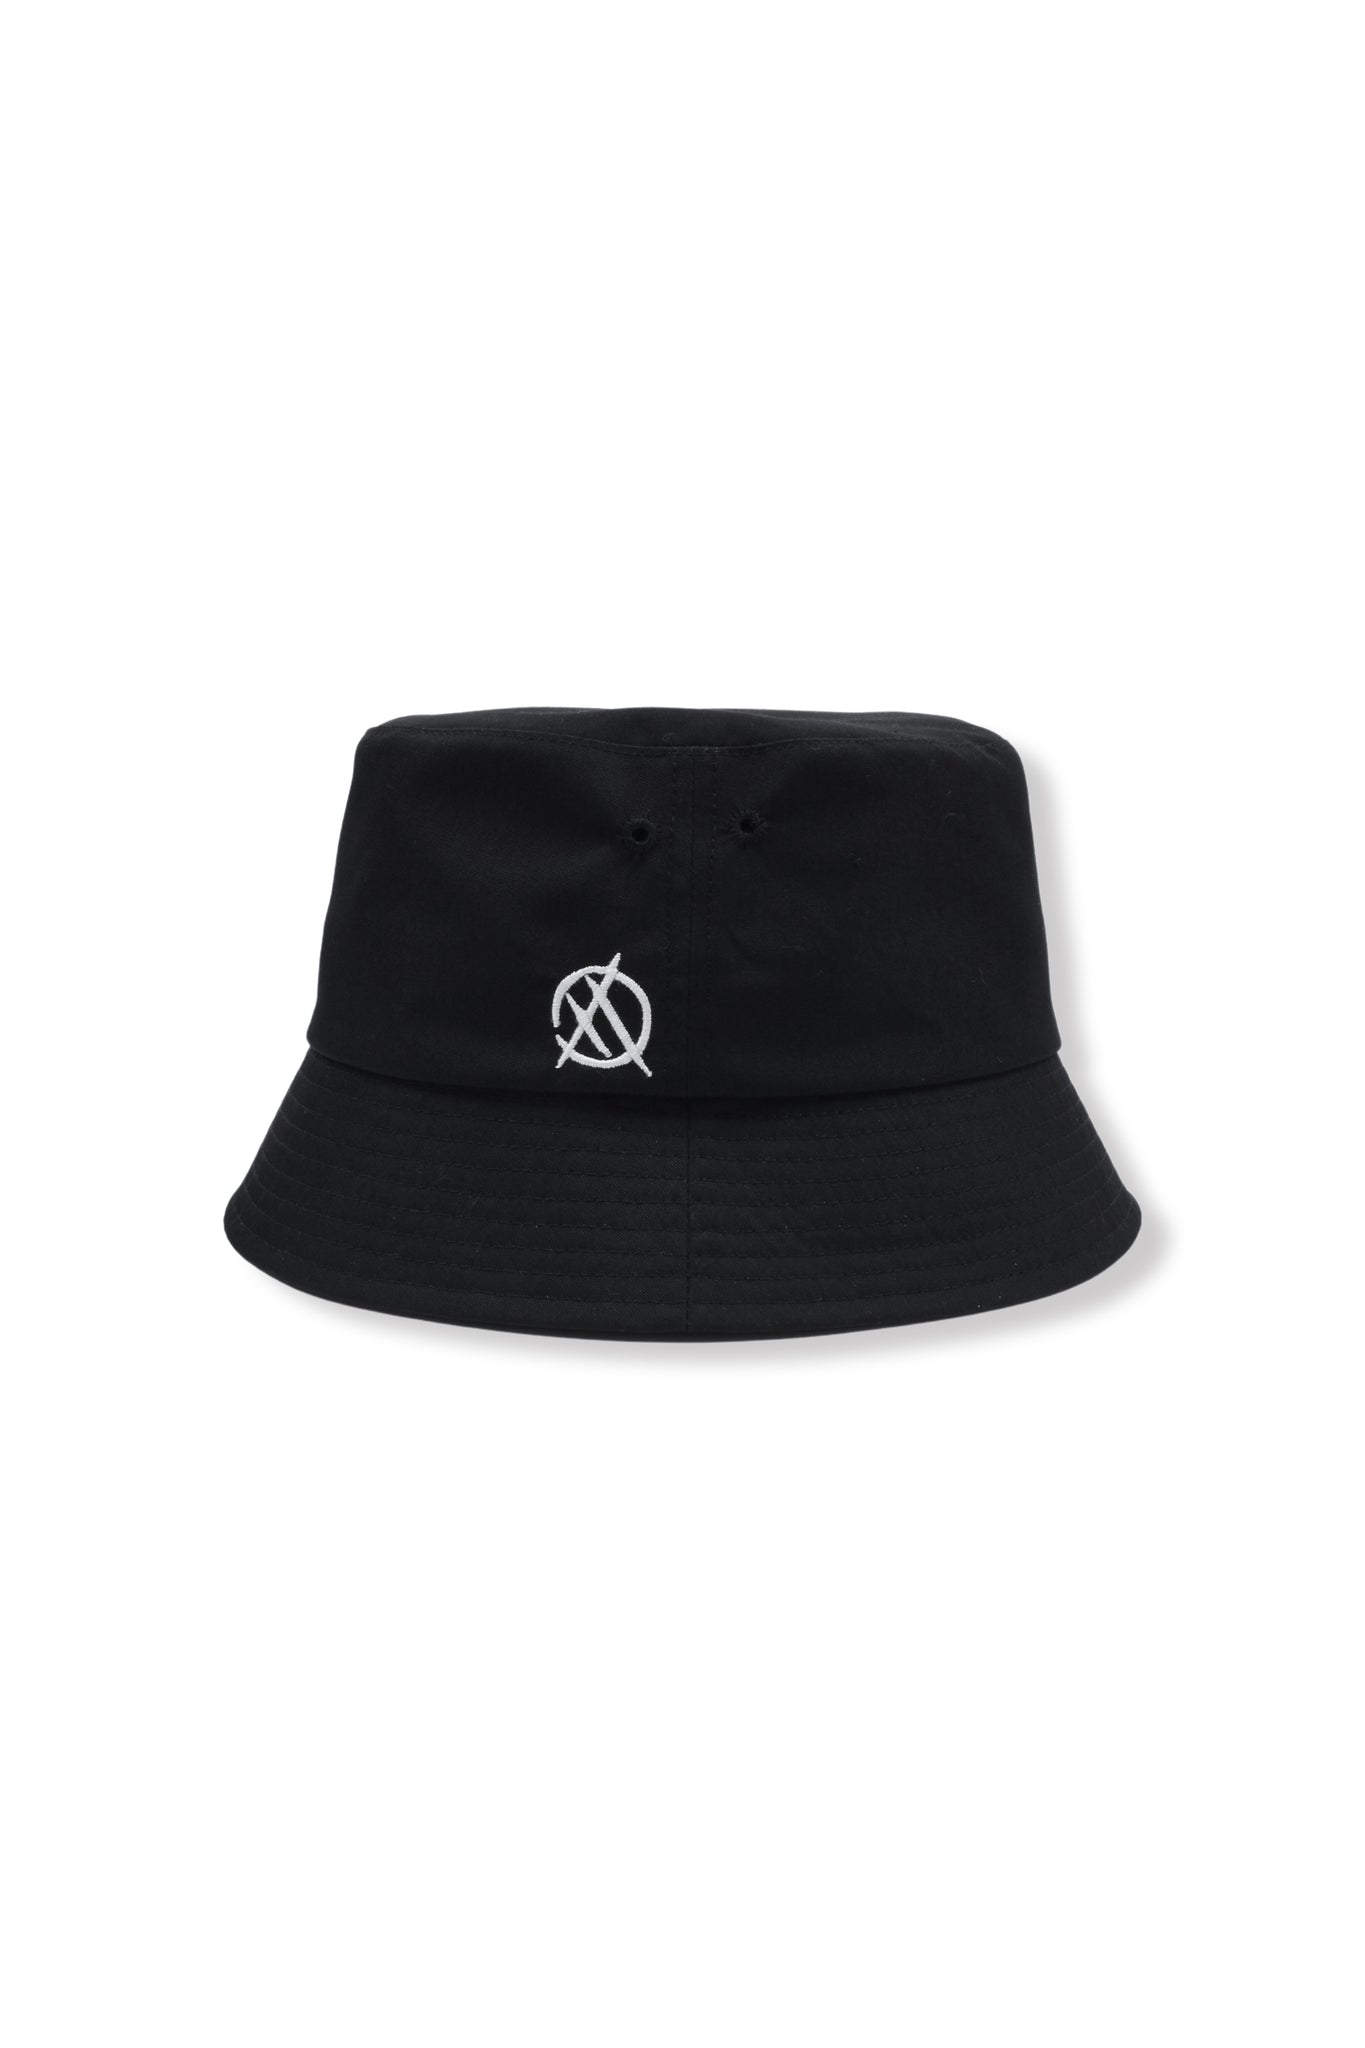 EMBROIDERY LOGO BACKET HAT